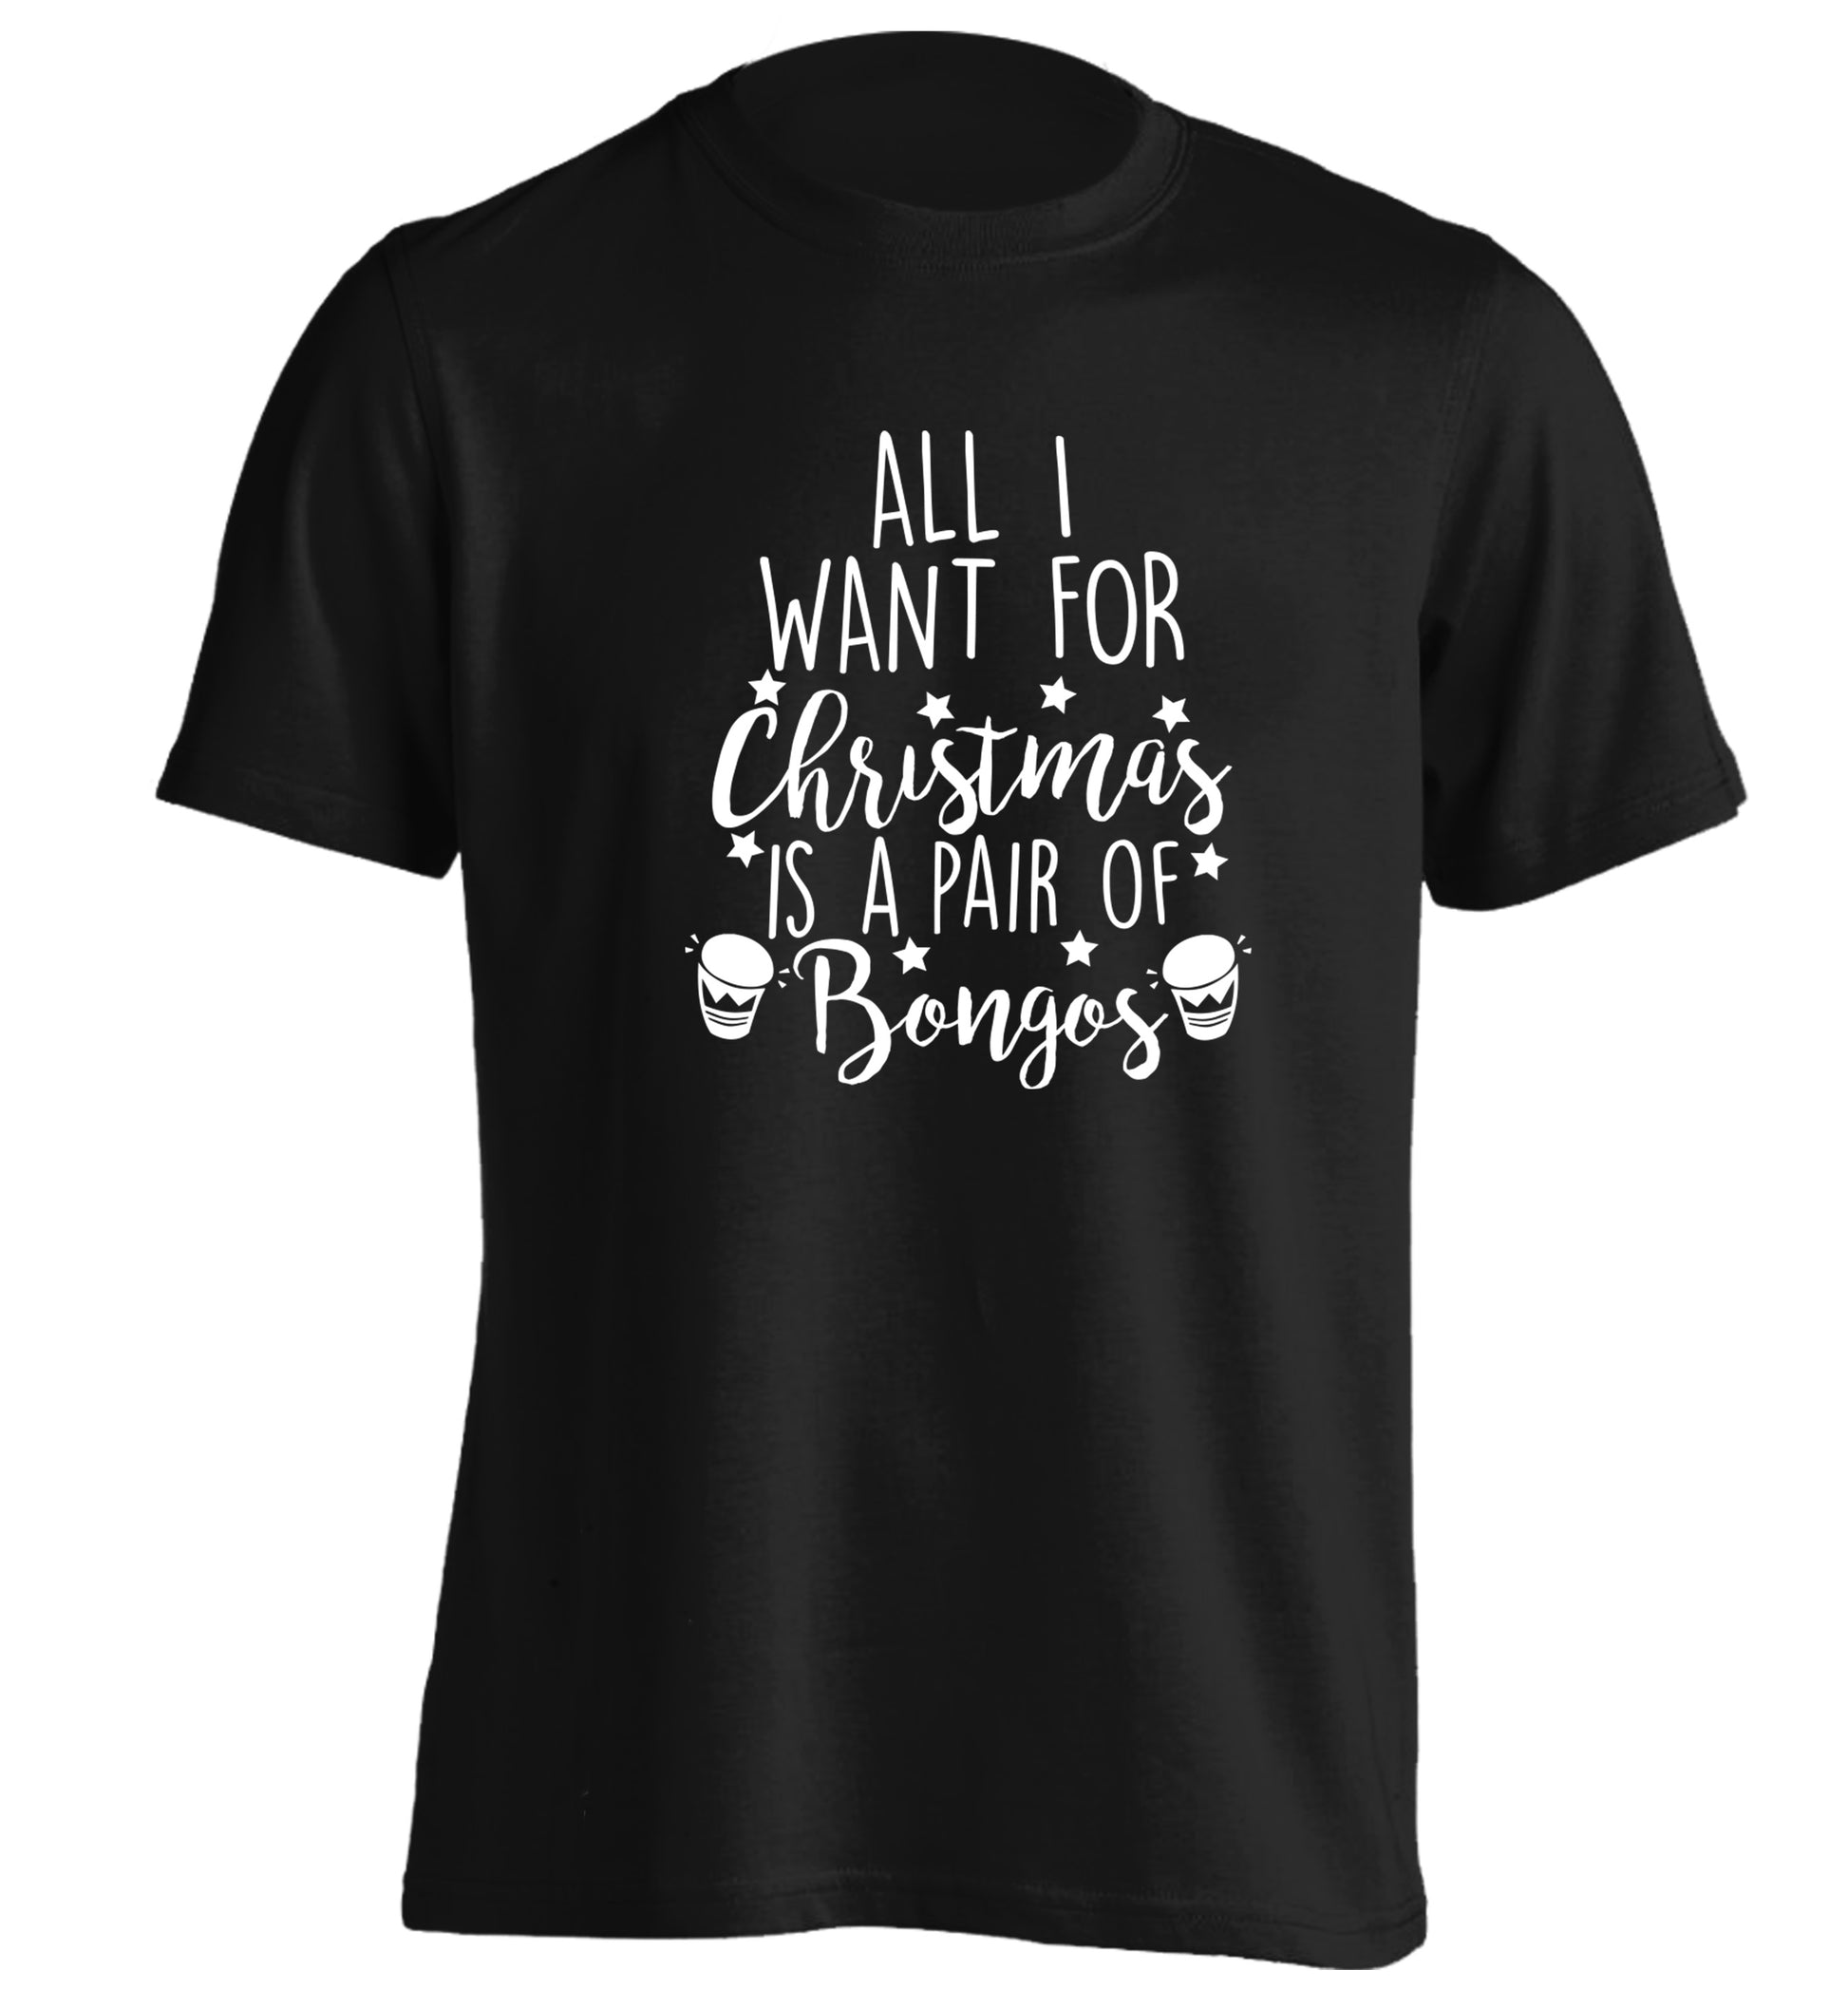 All I want for Christmas is a pair of bongos! adults unisex black Tshirt 2XL